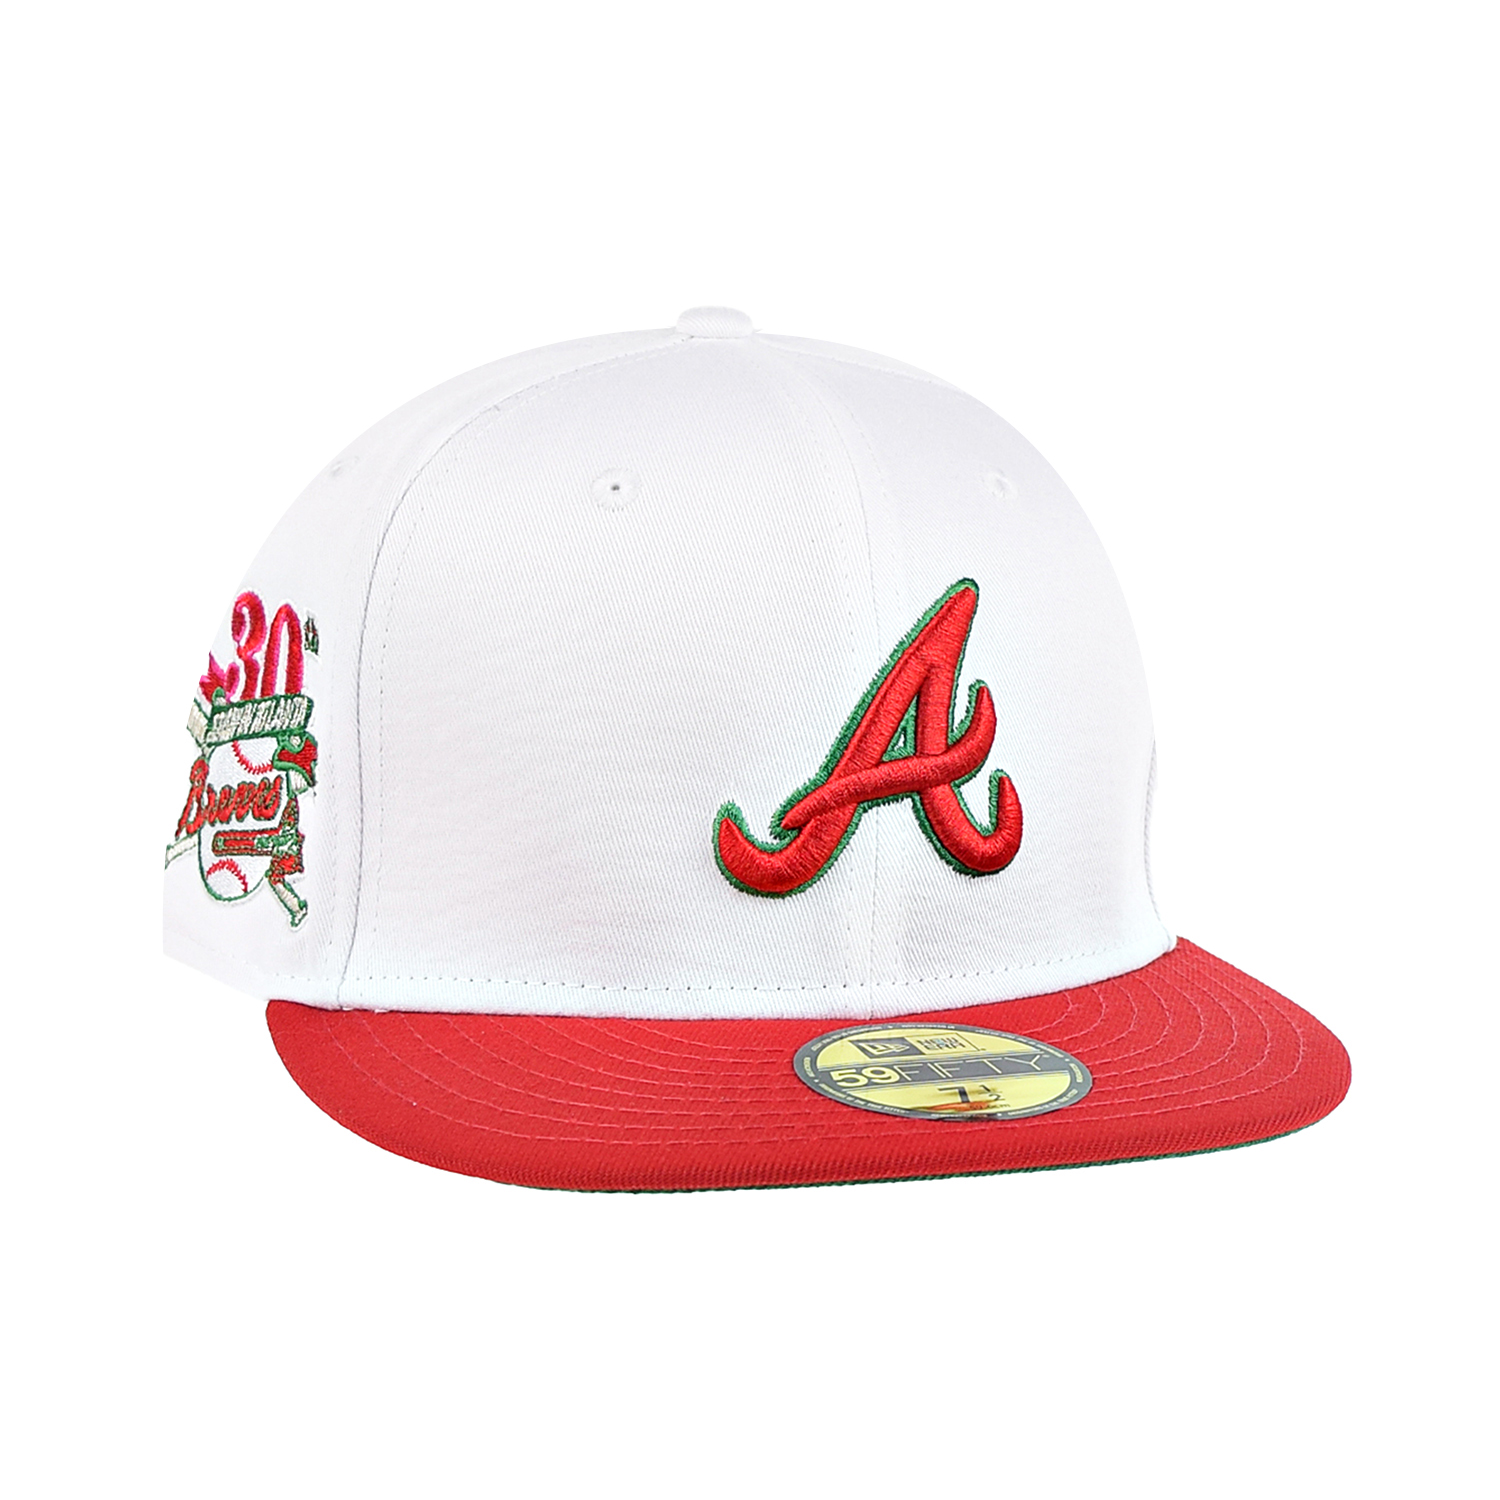 New Era Atlanta Braves 30th Anniversary 59Fifty Men's Fitted Hat White-Red 70680007 (Size 7 1/4)